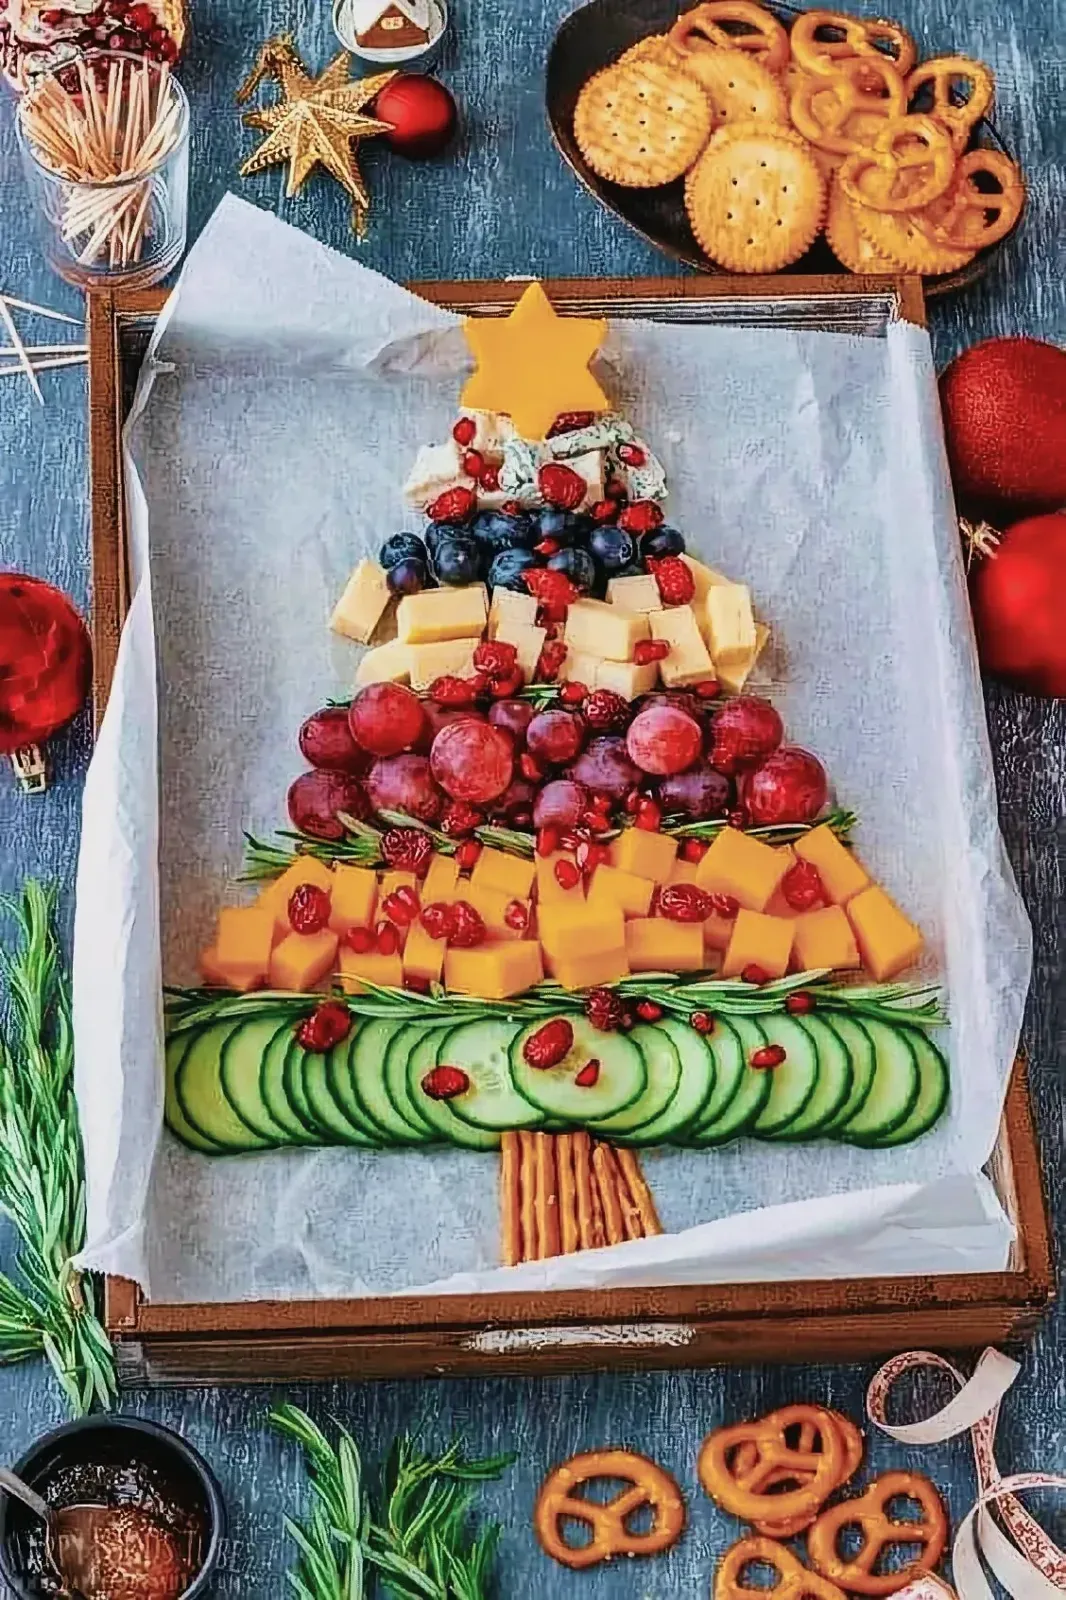 Christmas Tree Cheese Board with a variety of fruits and vegetables shaped into a festive Christmas tree.